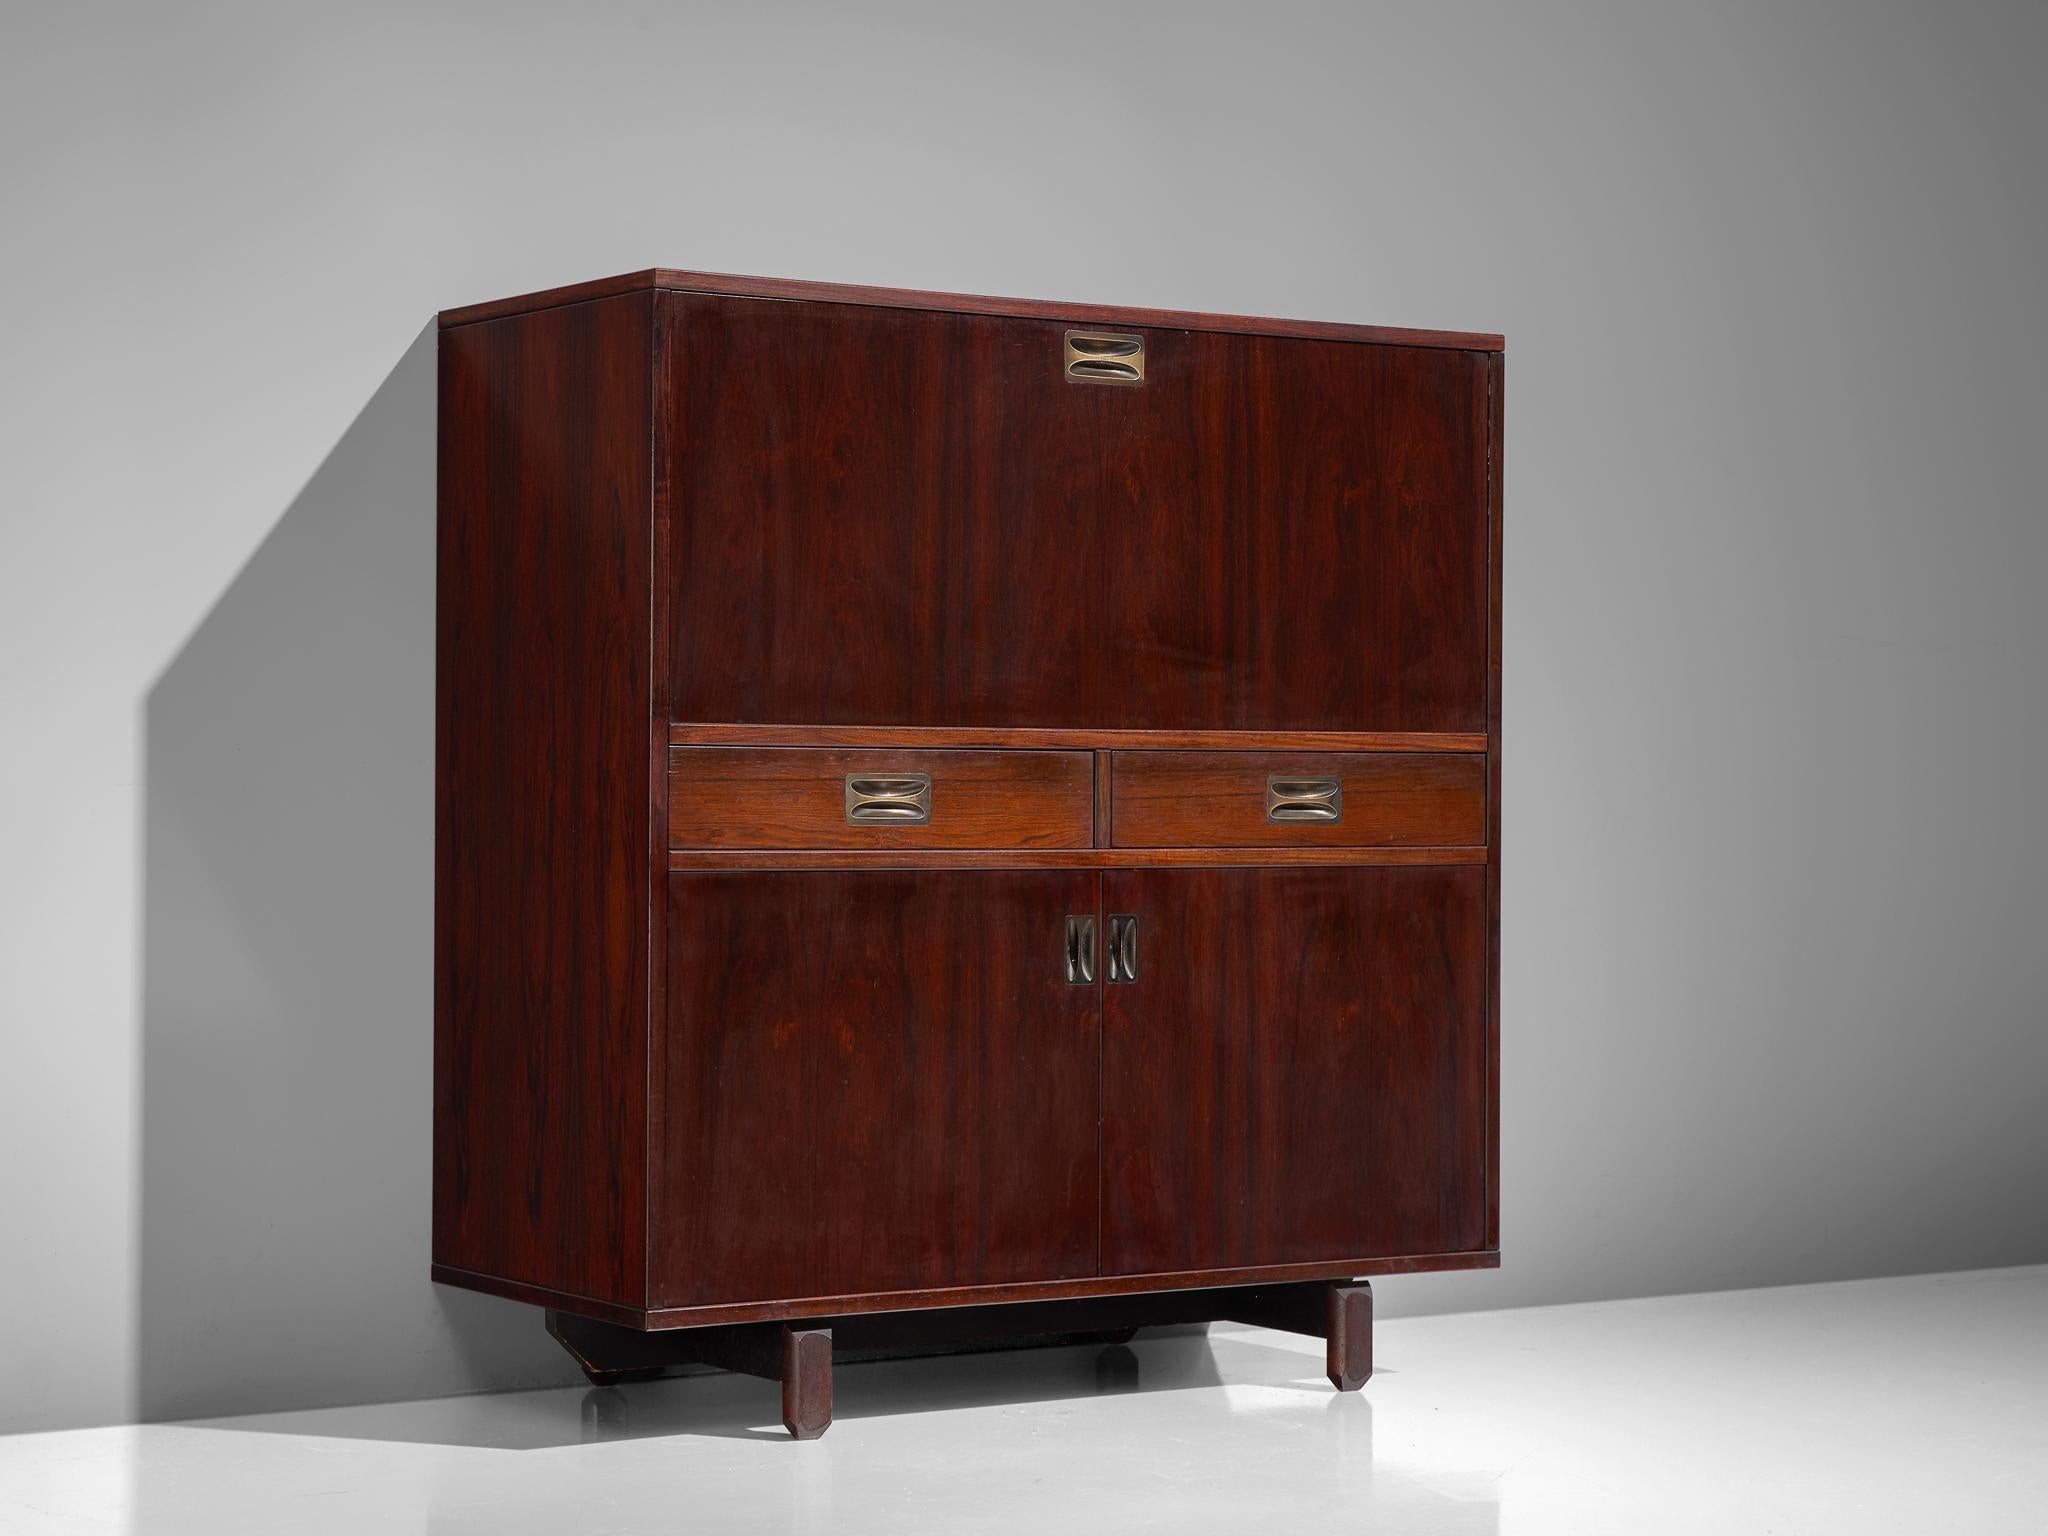 High sideboard, in rosewood and solid brass handles, Italy, 1950s.

This exquisitely finished cabinet is executed in rosewood. The high board features architectural features in the sense that it is built up of various blocks that form a unified